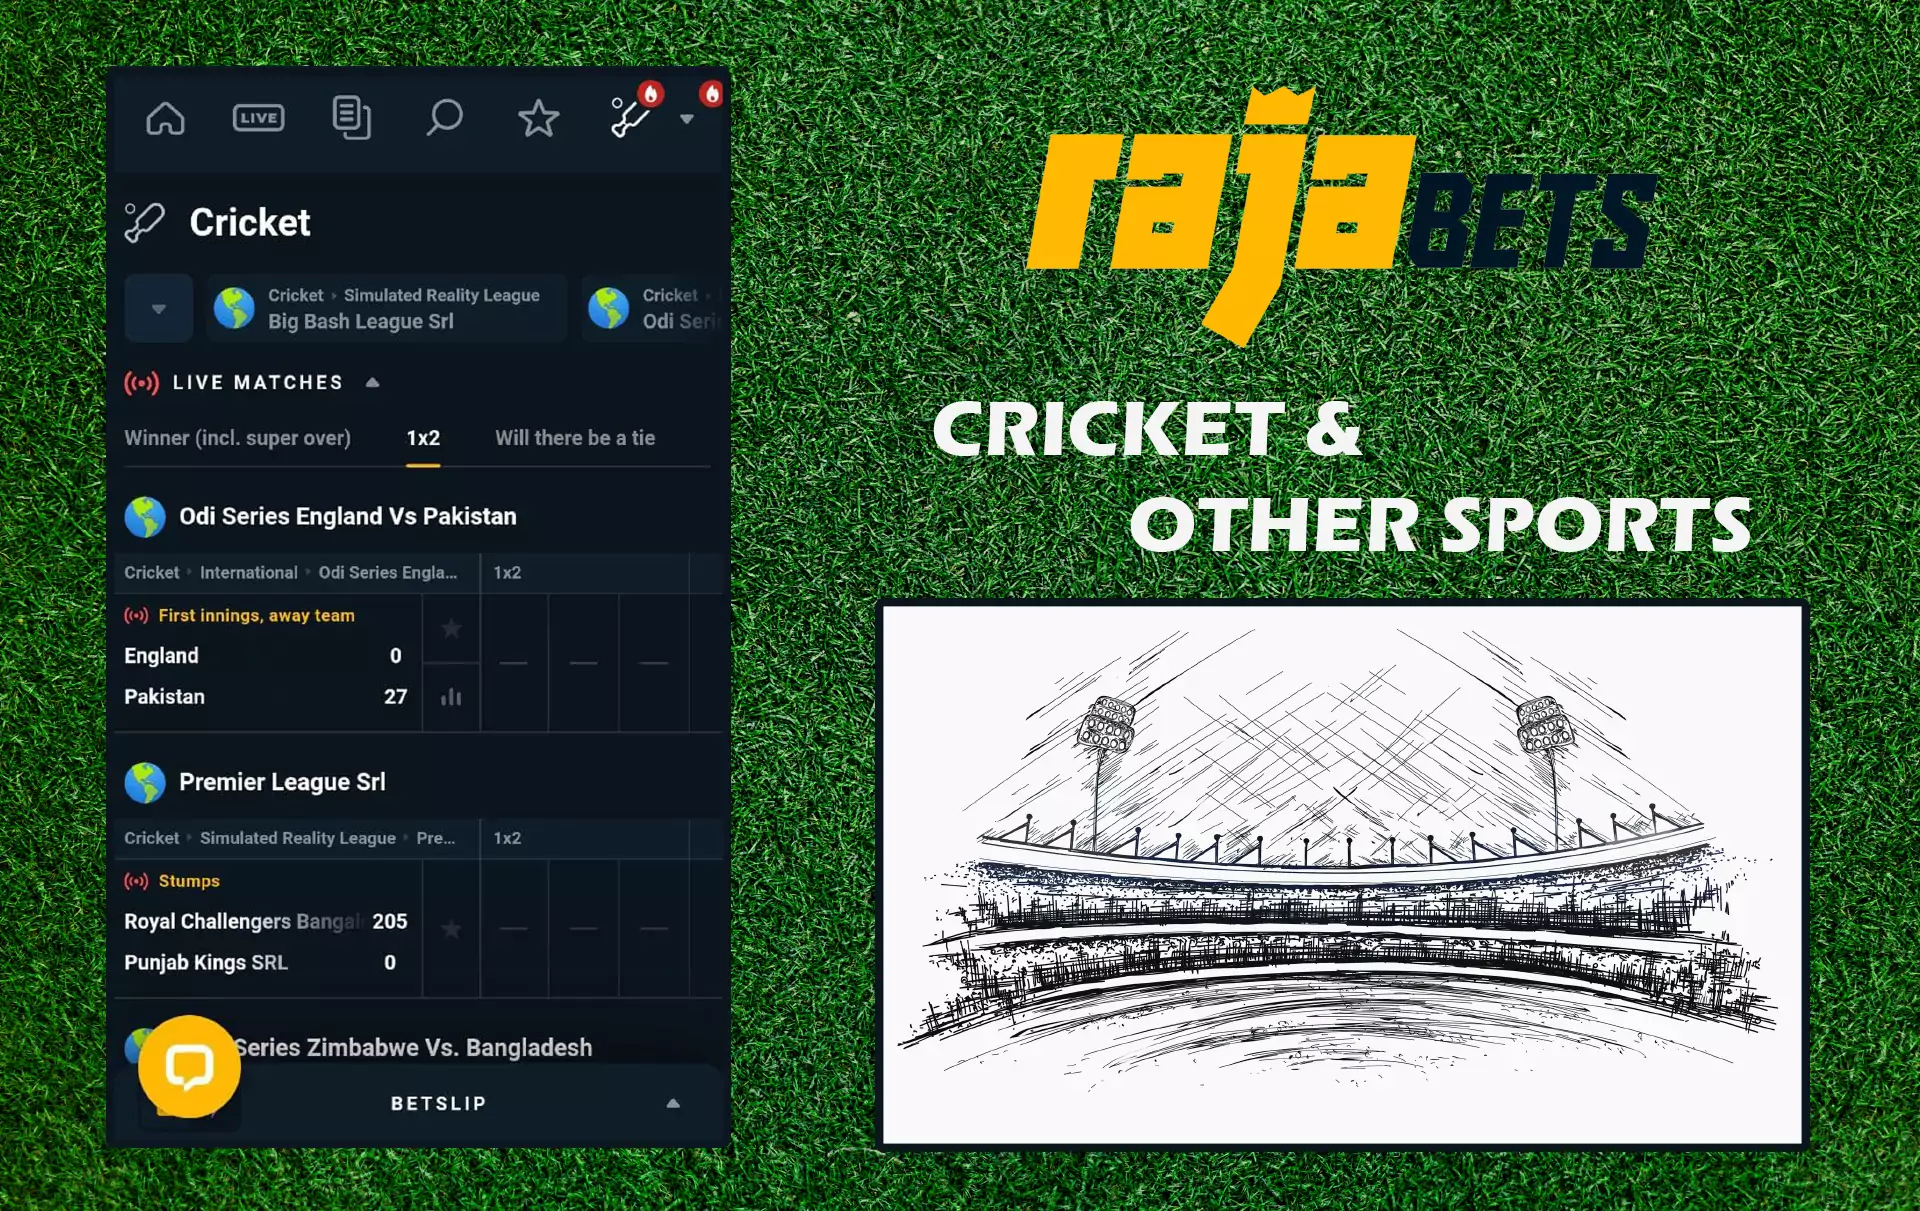 In the sports section, fans can place bets on cricket and other sports matches.